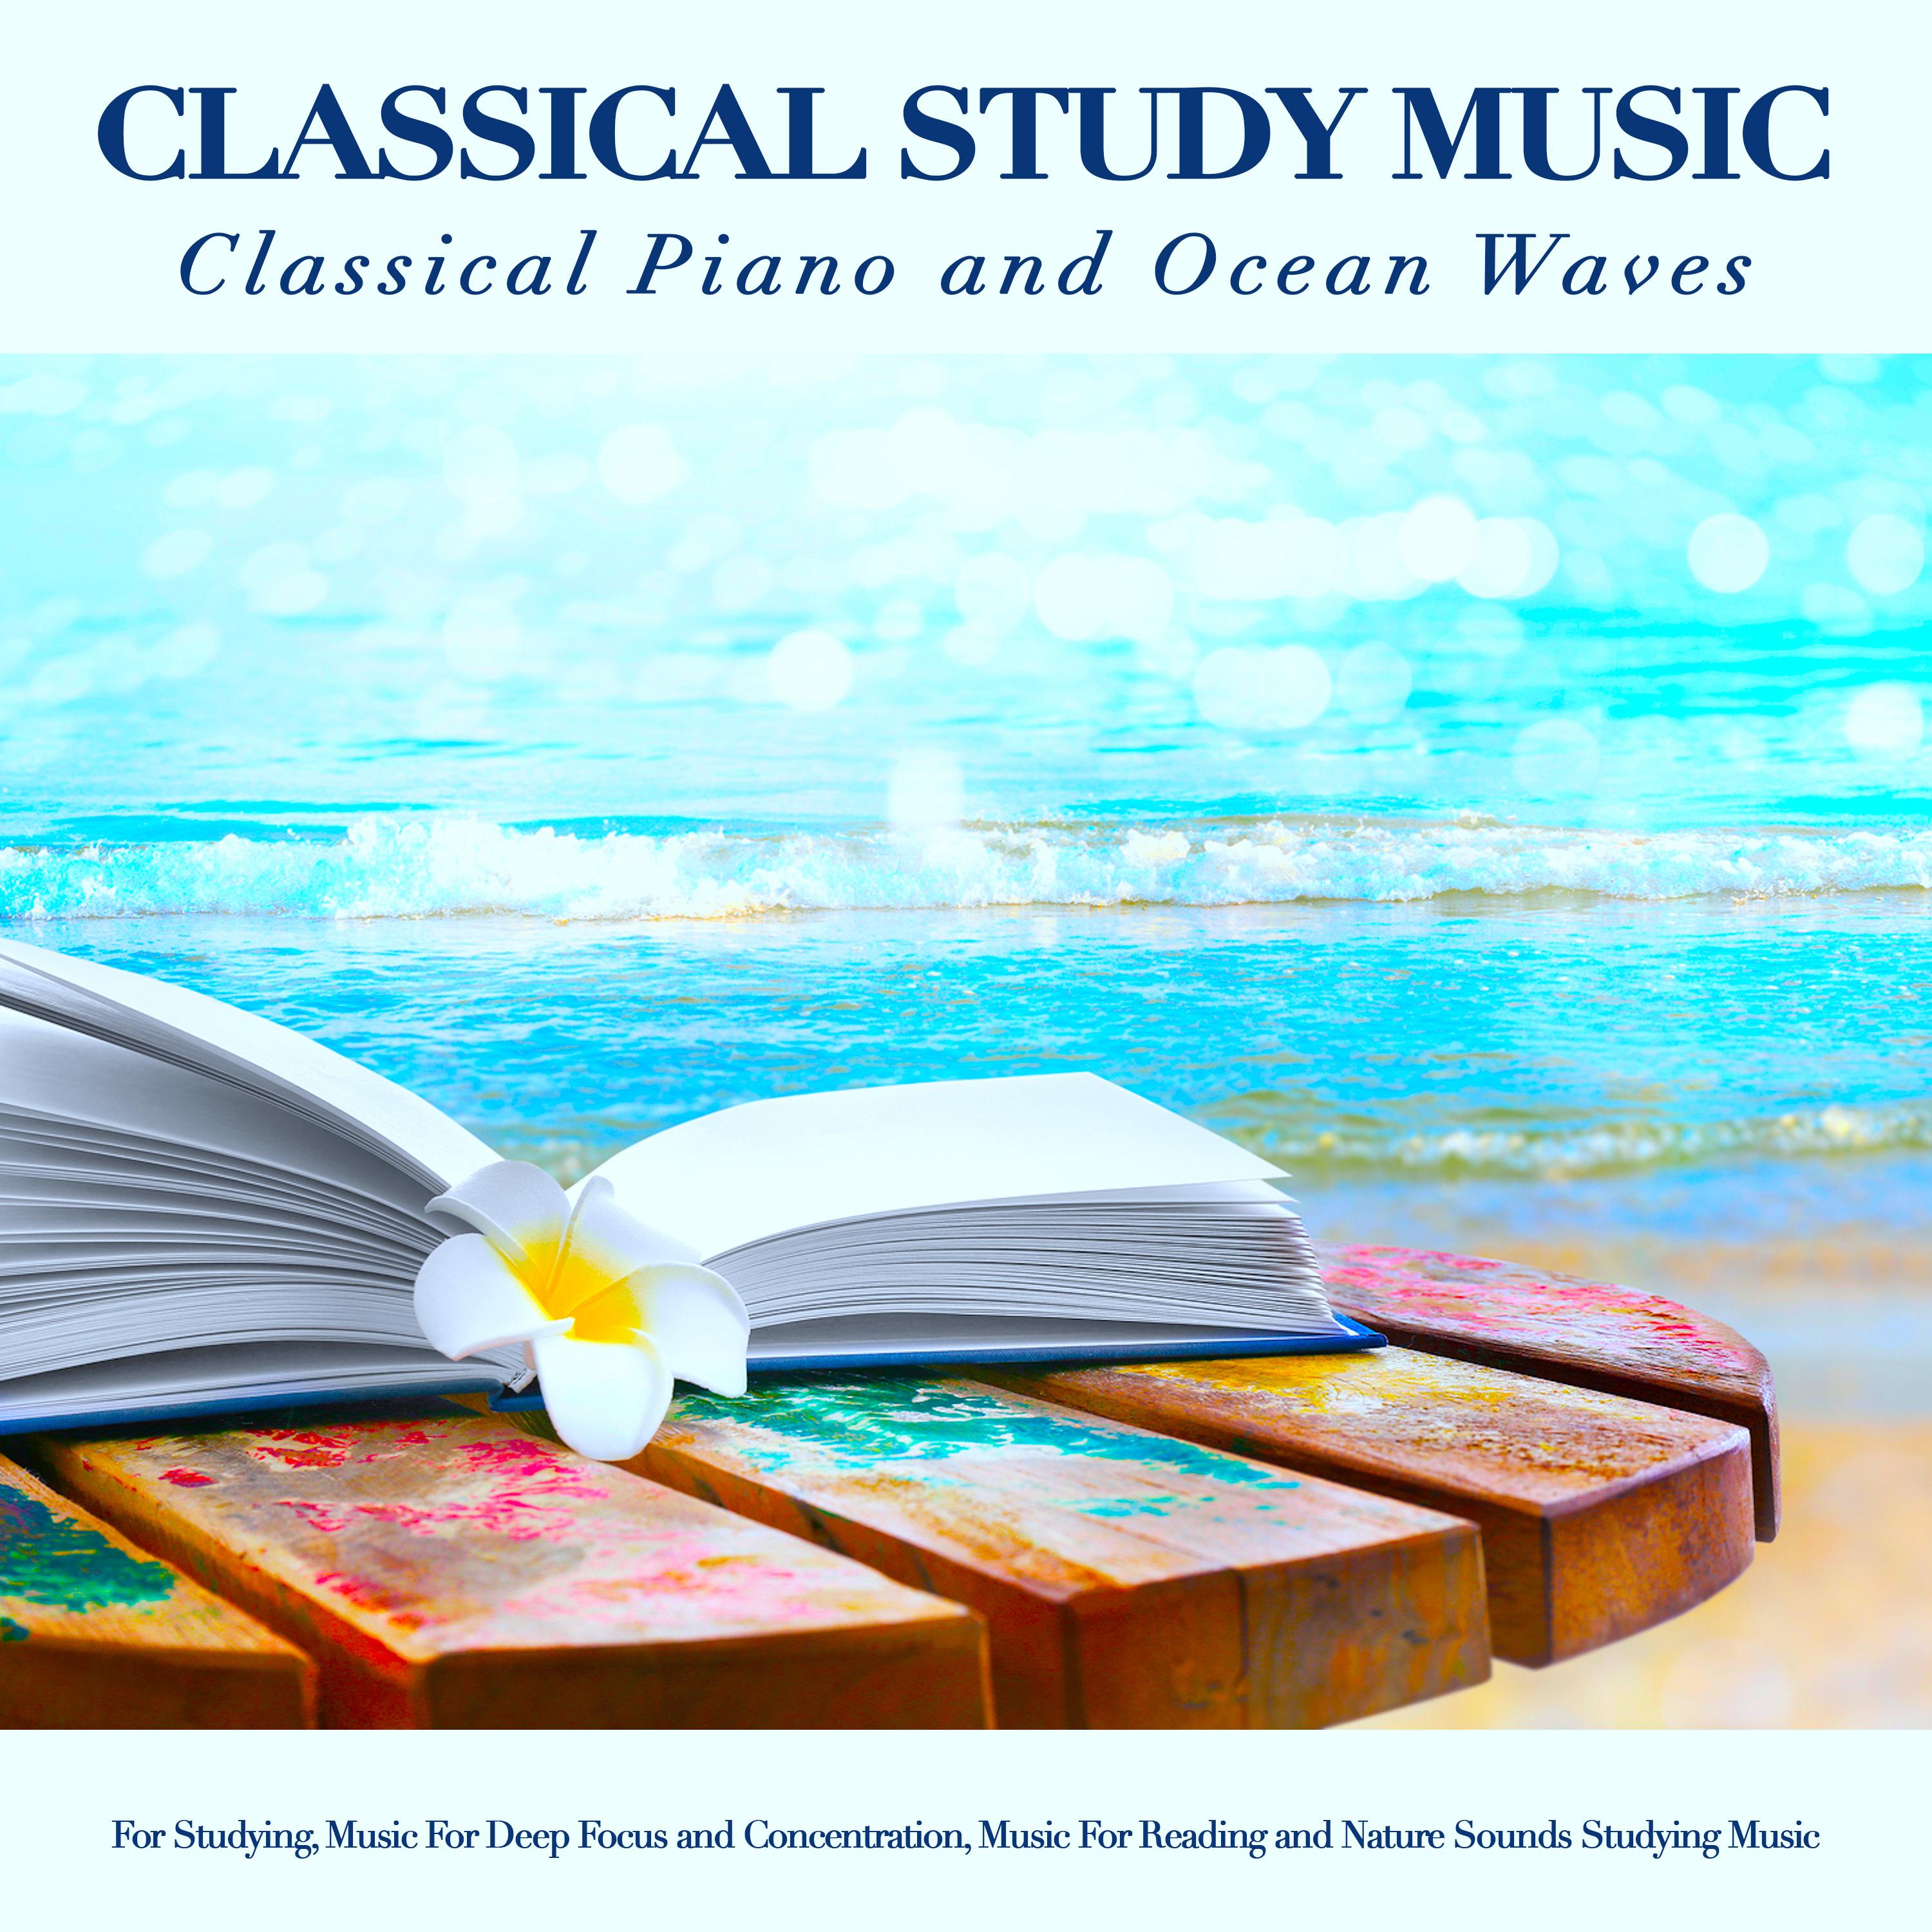 Brahms Lullaby - Brahms - Classical Study Music - Ocean Waves Sounds - Classical Piano for Studying